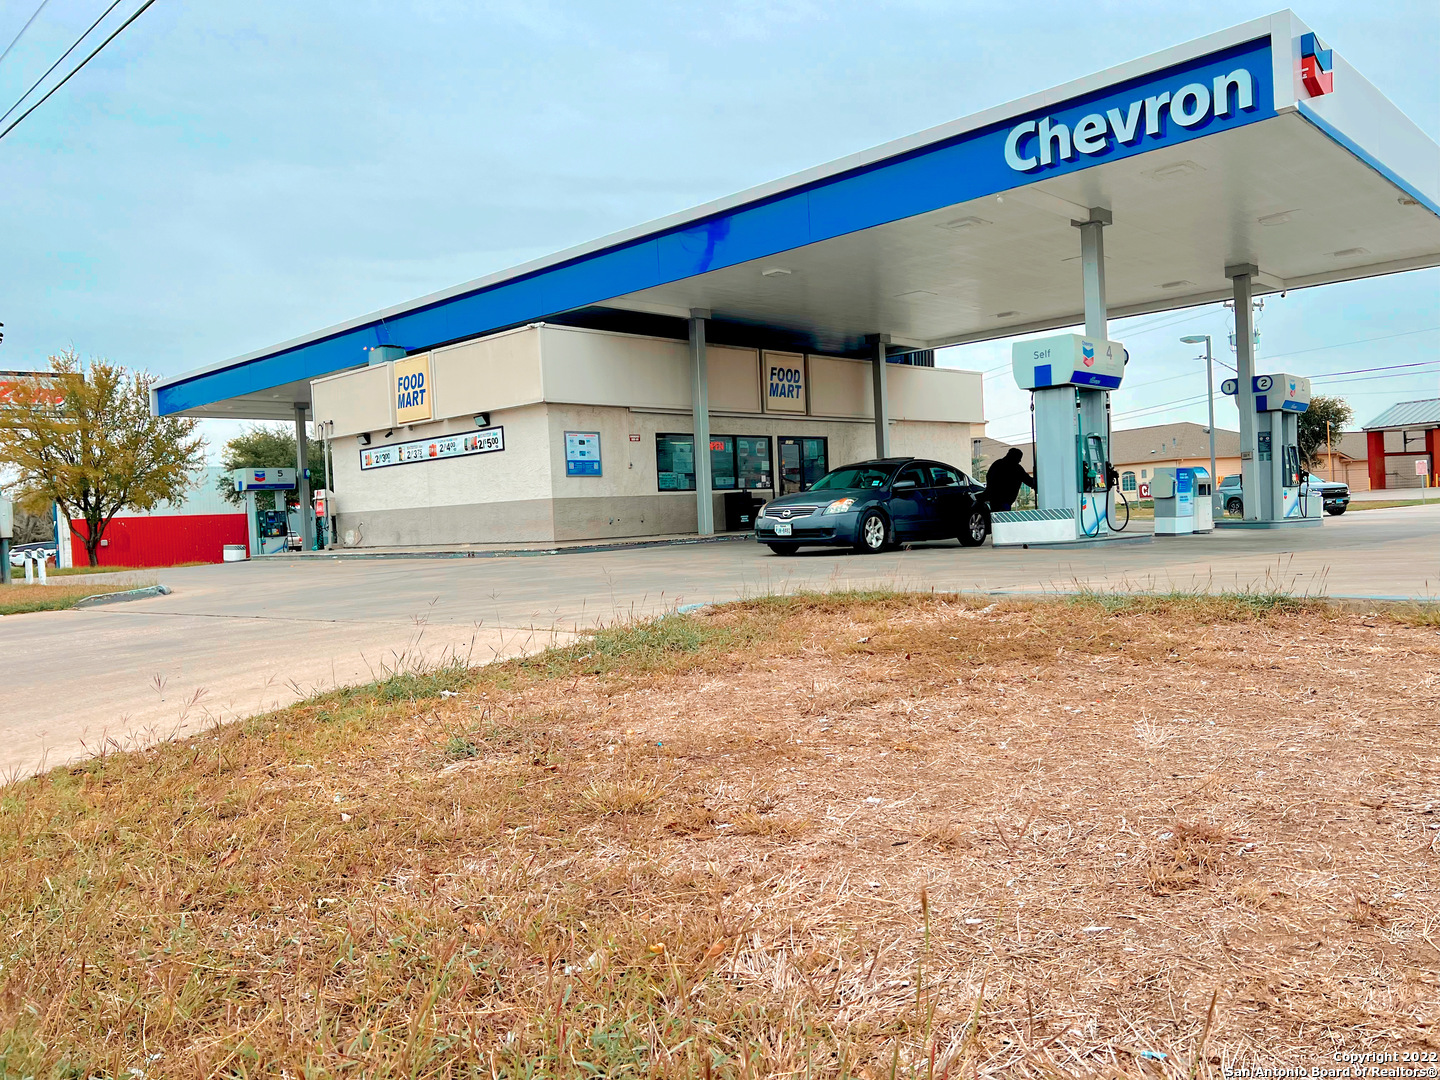 Great Exposure Gas Station on a Large Commercial Lot right off of Austin Hwy in San Antonio!    Current Lease in place with Operating existing tenant. Please inquire for Additional Details.